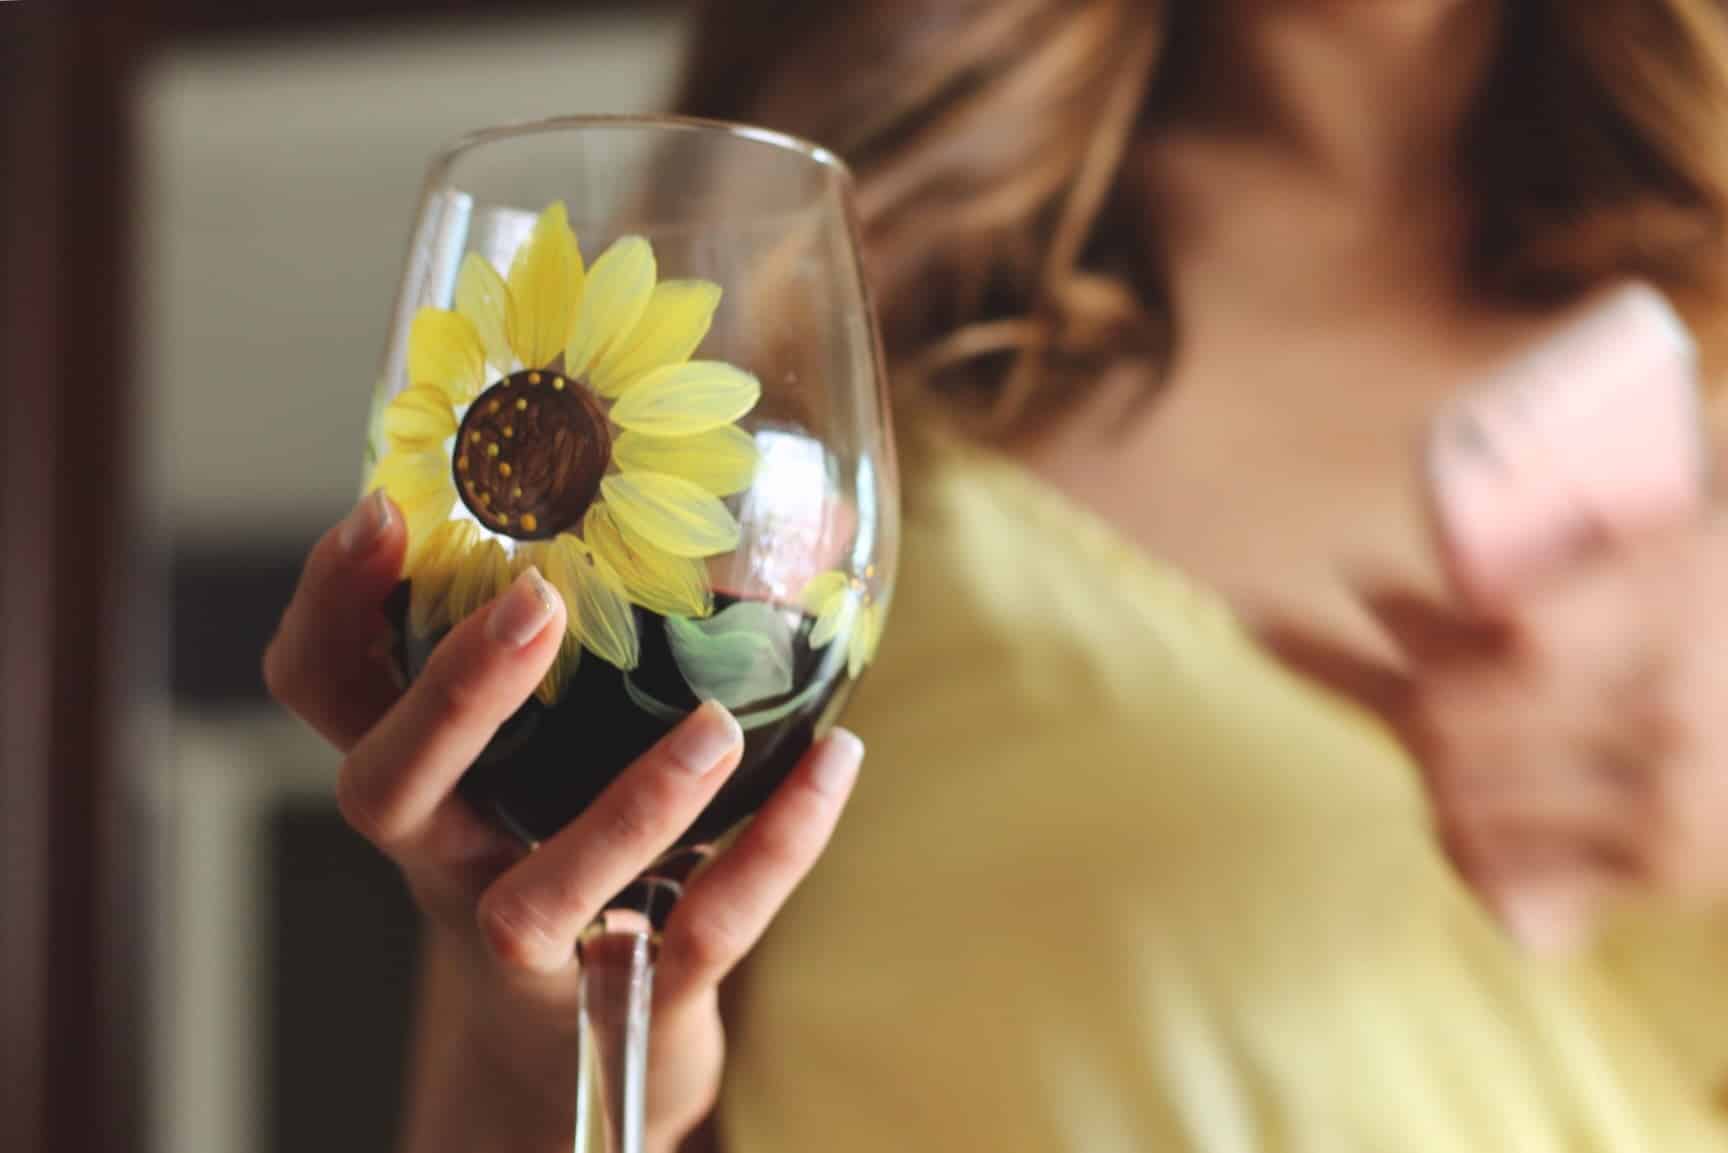 A flower painted on a wine glass